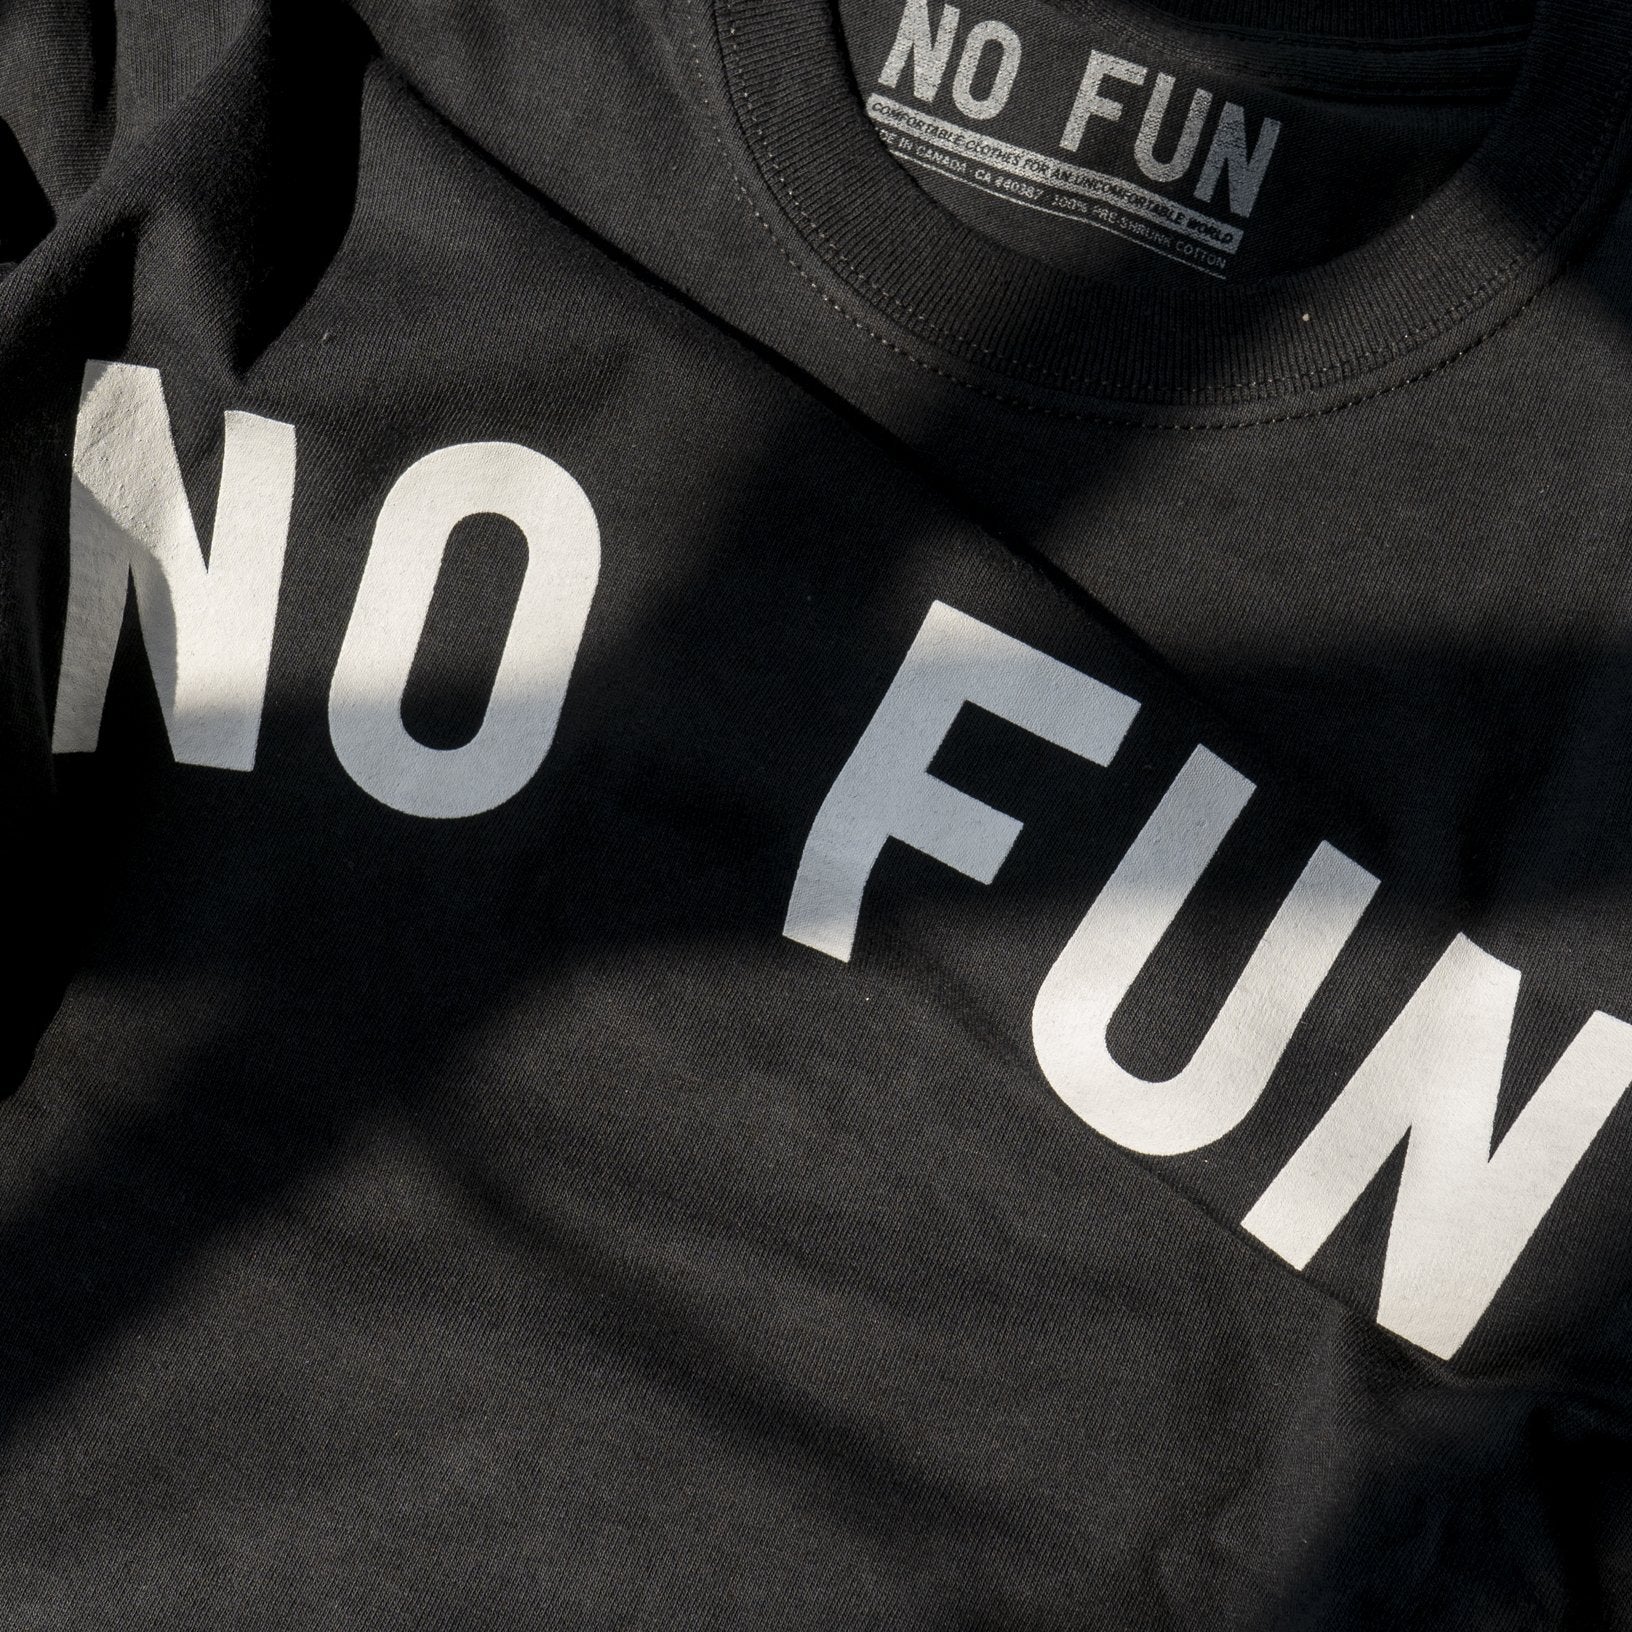 Detail of the No Fun® text across the classic t-shirt. Shirt is black, text is white.